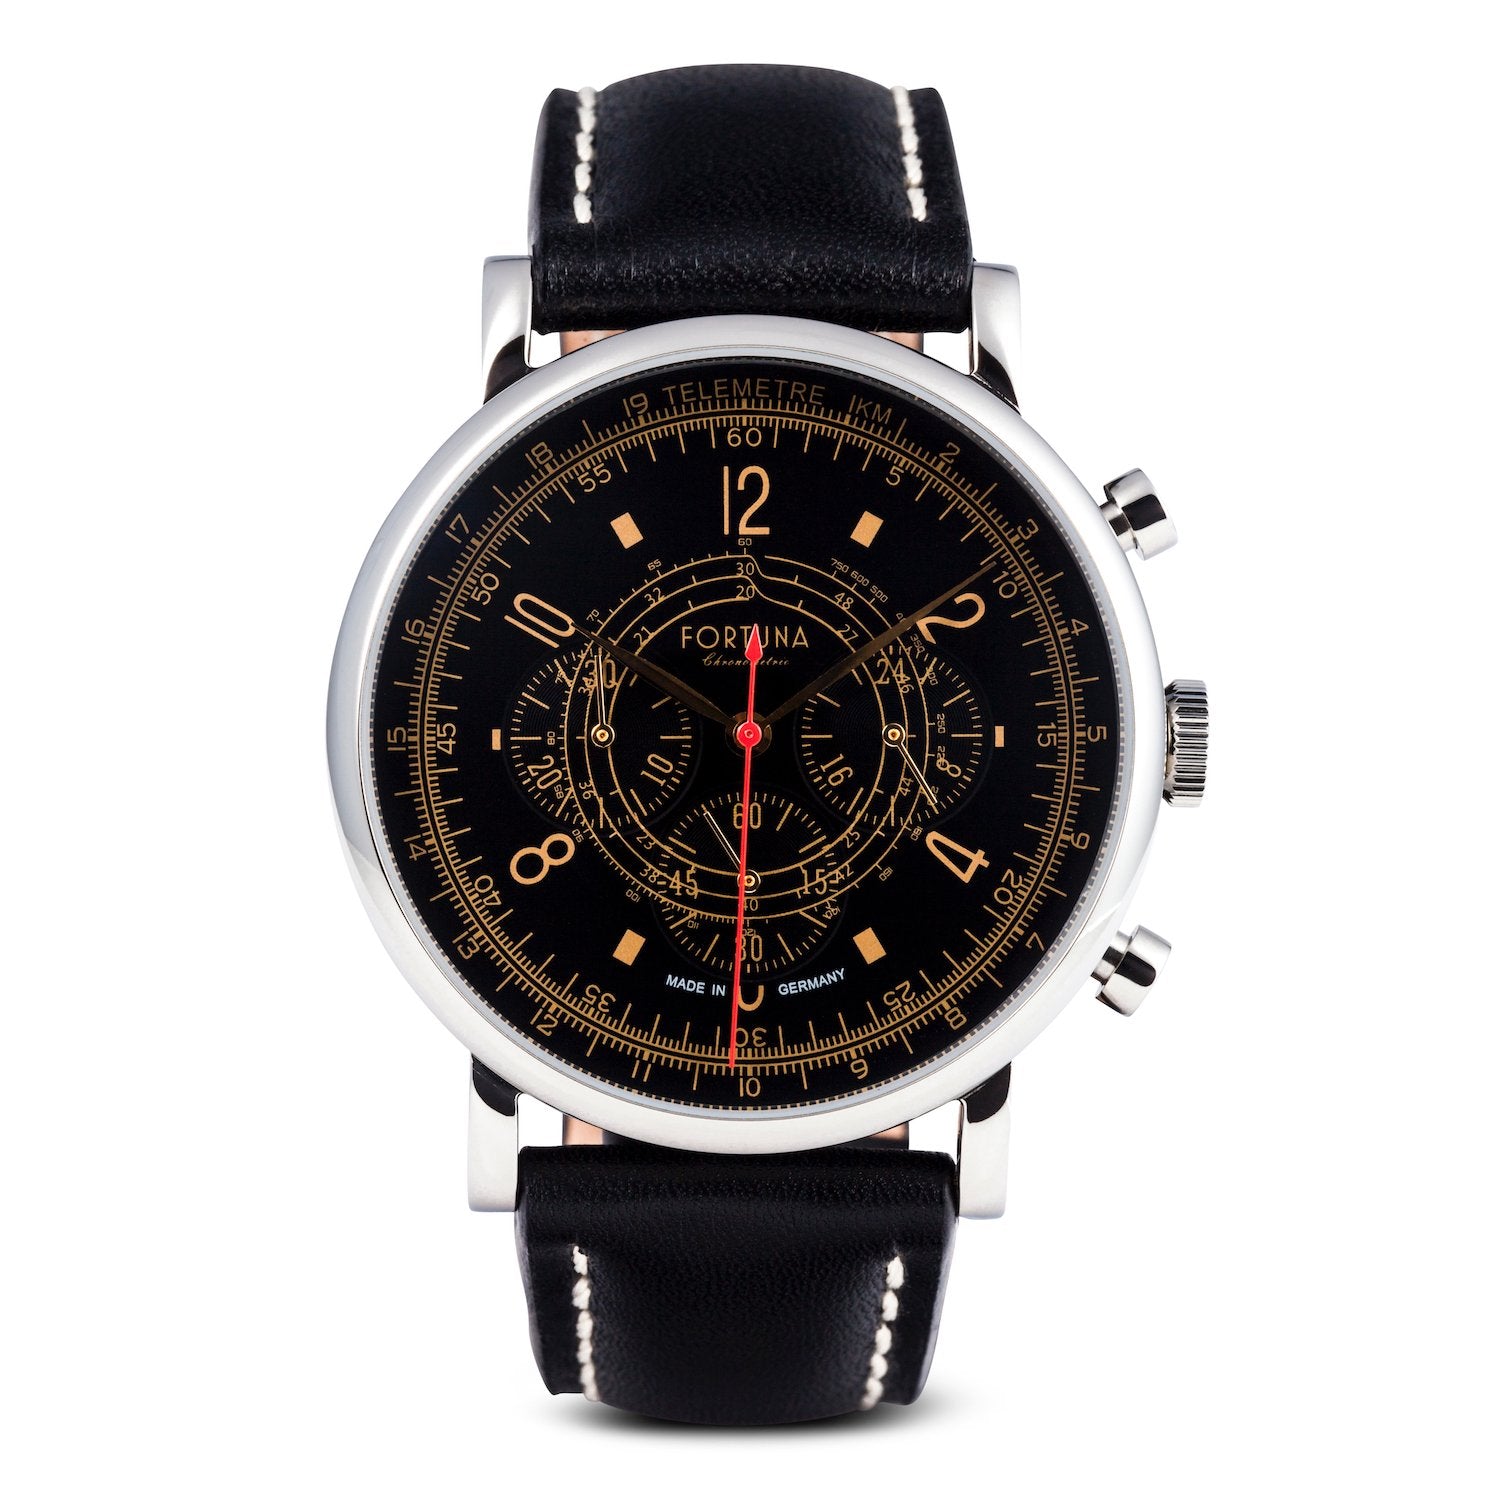 GEREON by Fortuna - SIMPLEX Collection Chronometrie